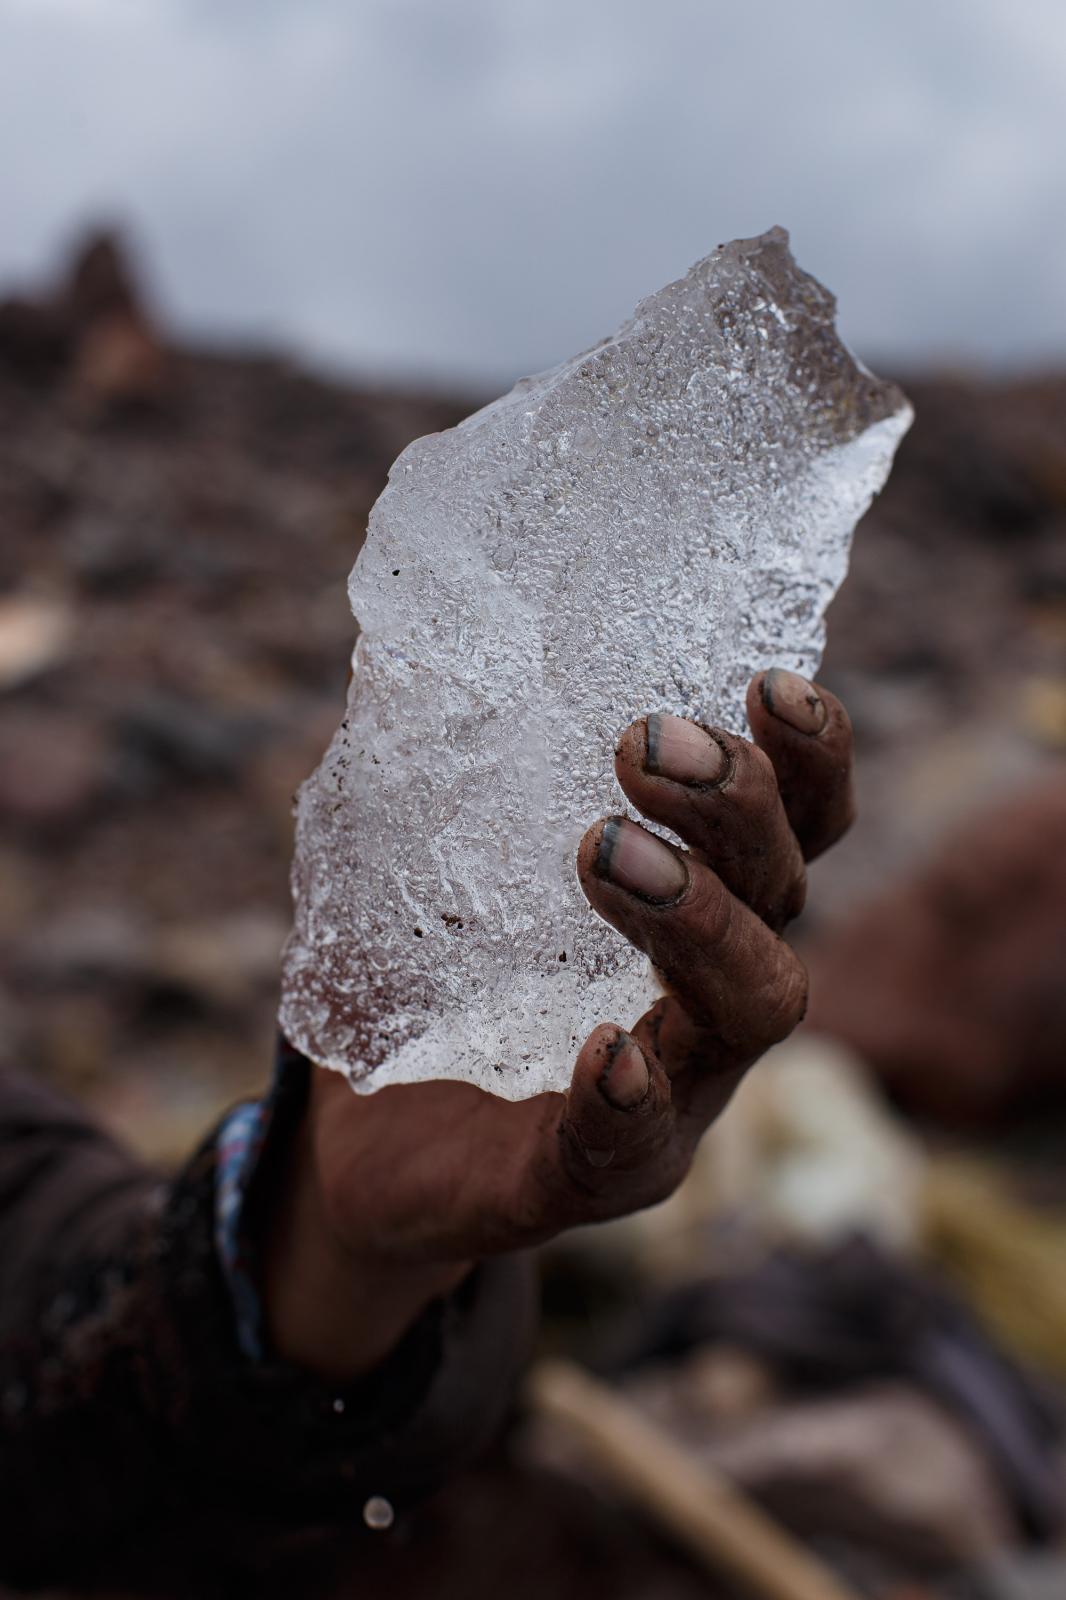 Der Eismann - A piece of ice from the Chimborazo volcano held by the...